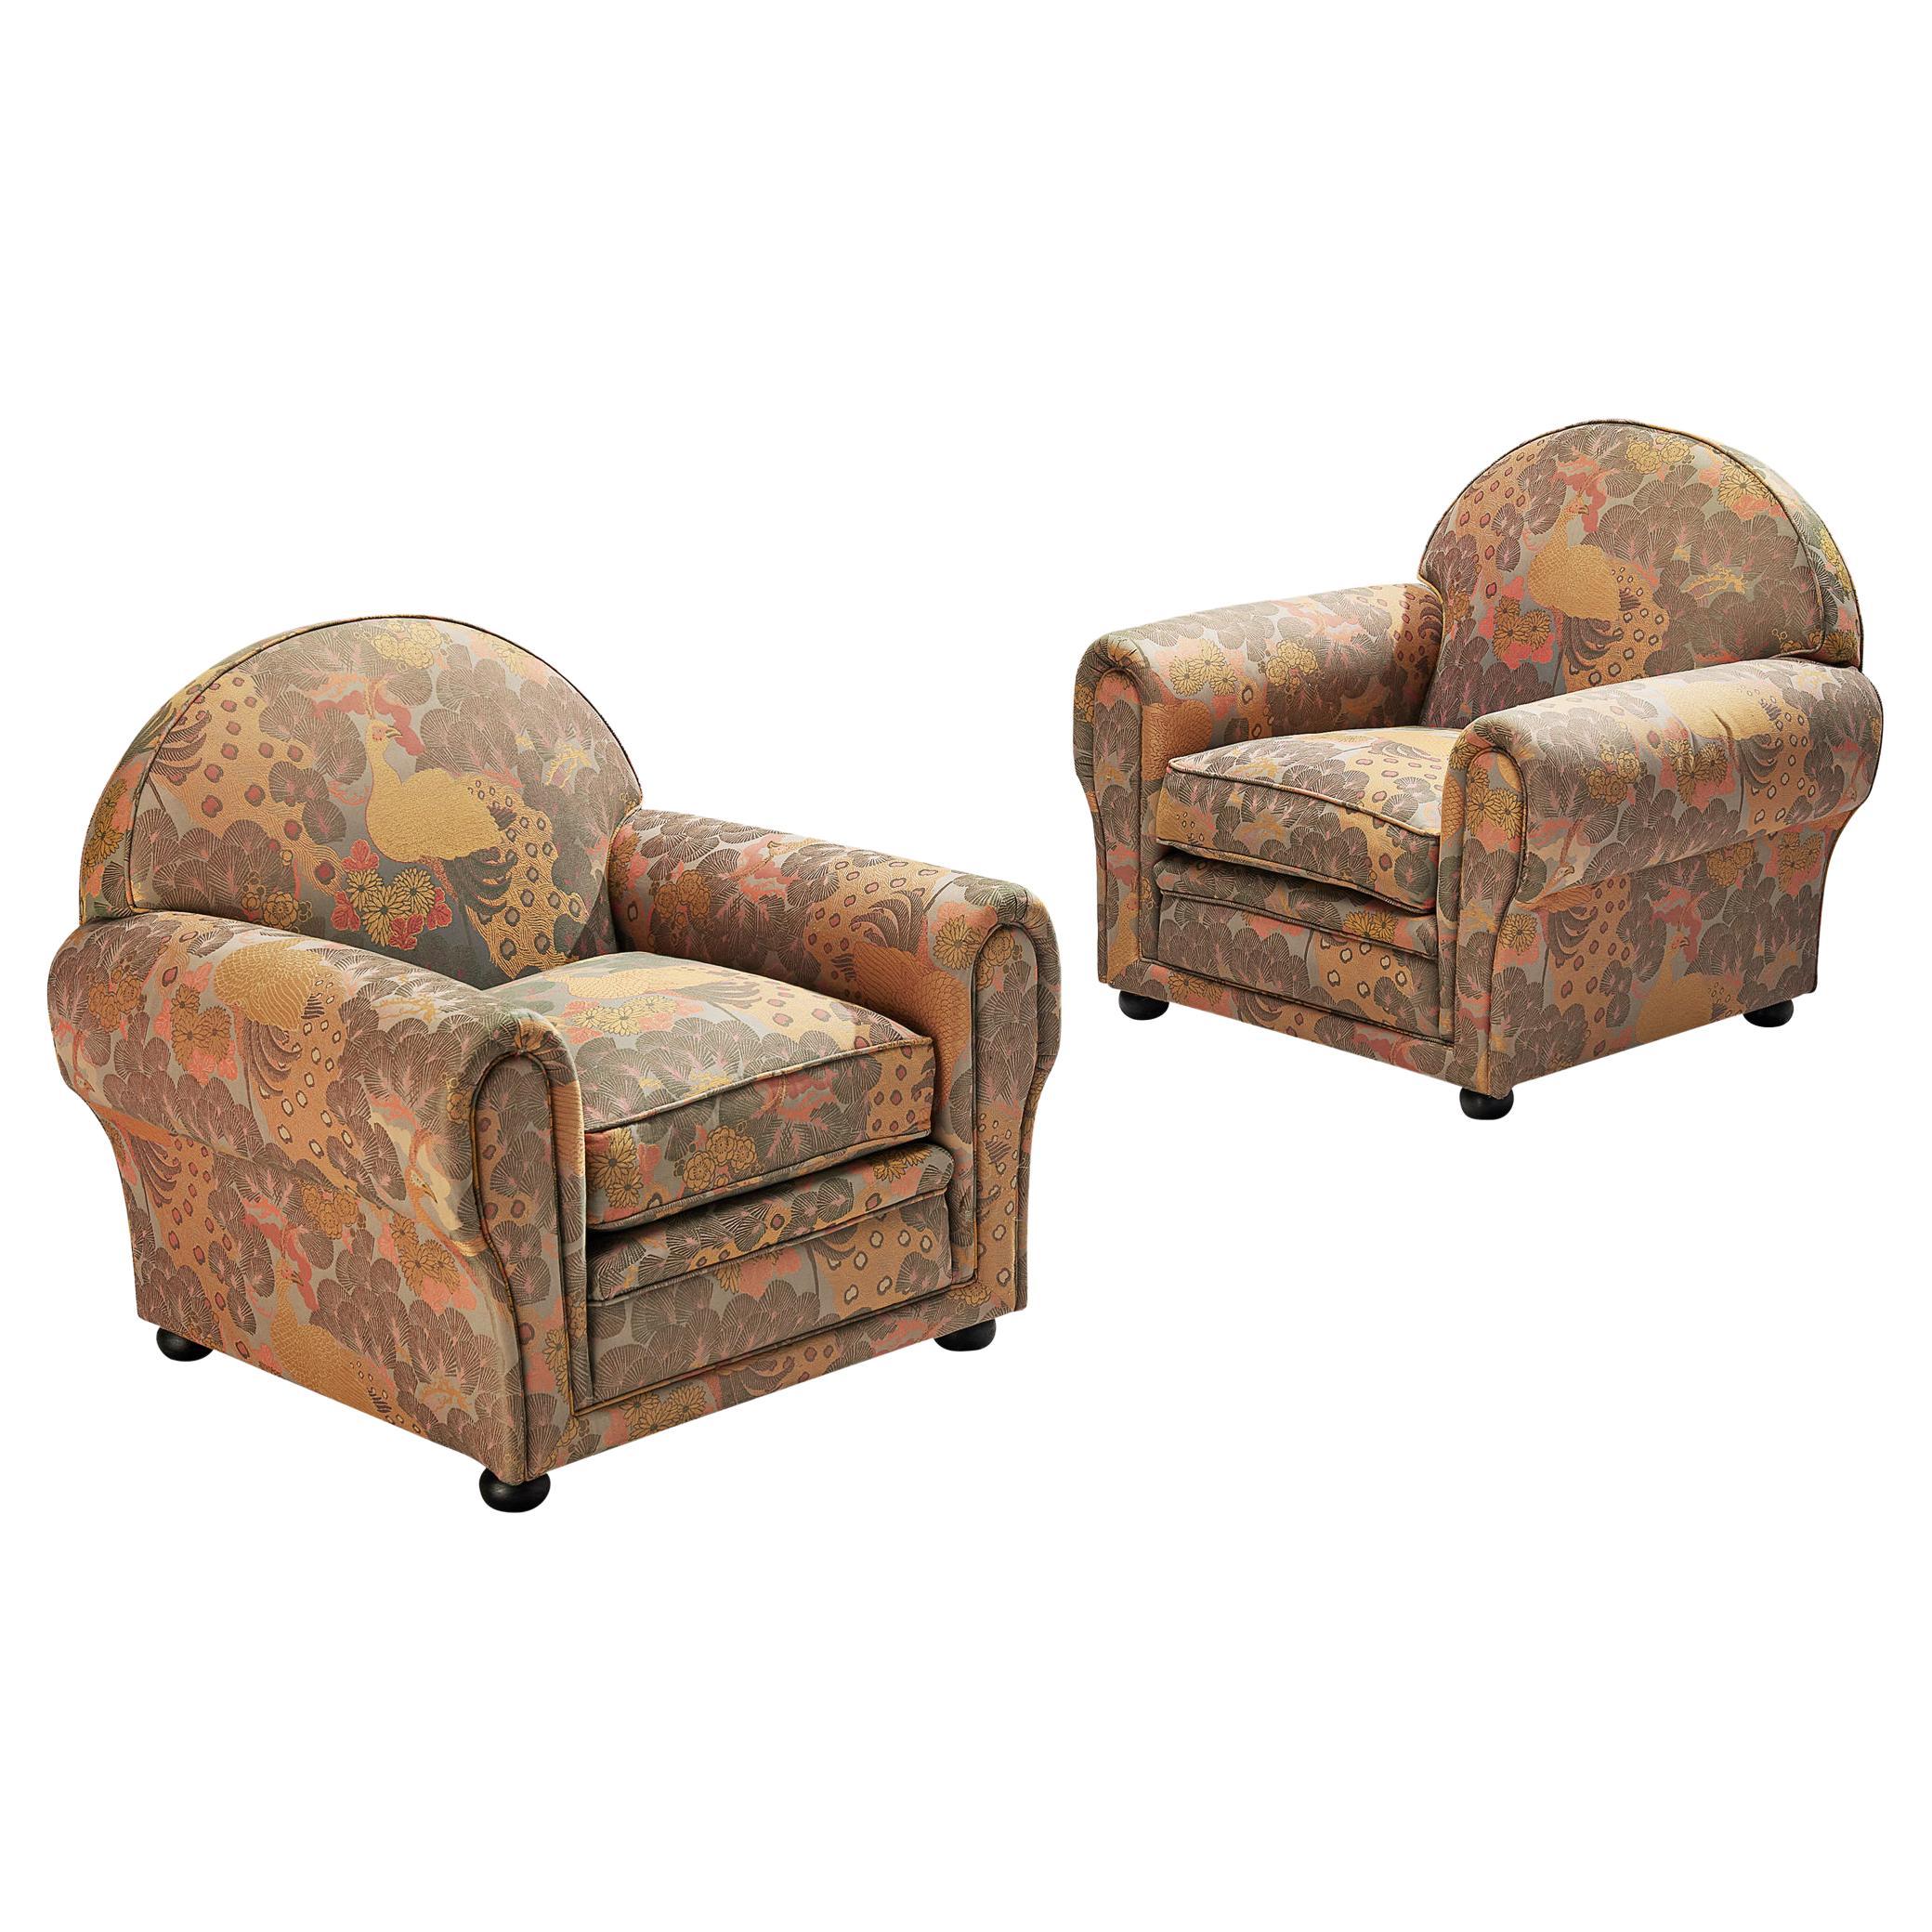 Unique Art Deco Armchairs in Botanical Upholstery For Sale